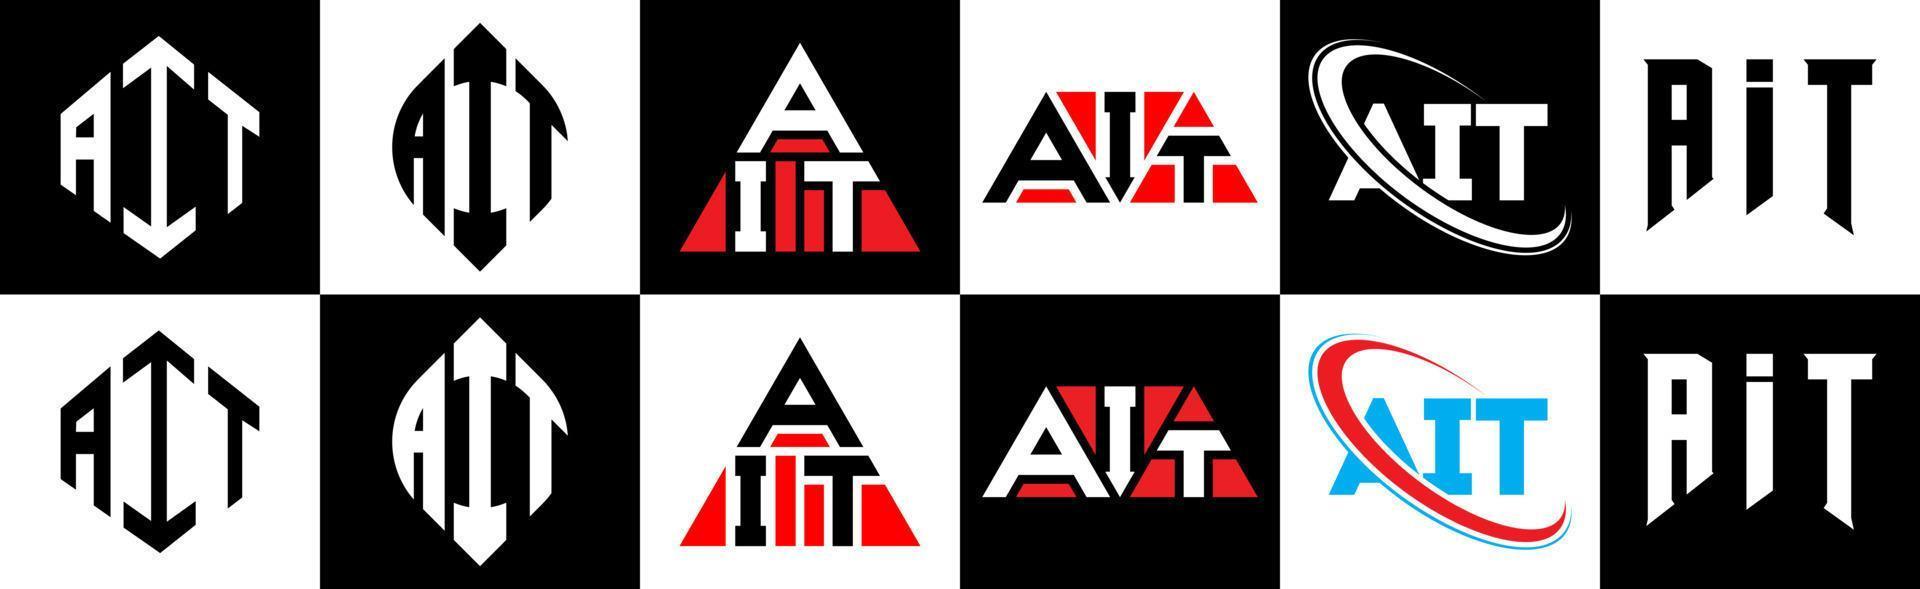 AIT letter logo design in six style. AIT polygon, circle, triangle, hexagon, flat and simple style with black and white color variation letter logo set in one artboard. AIT minimalist and classic logo vector